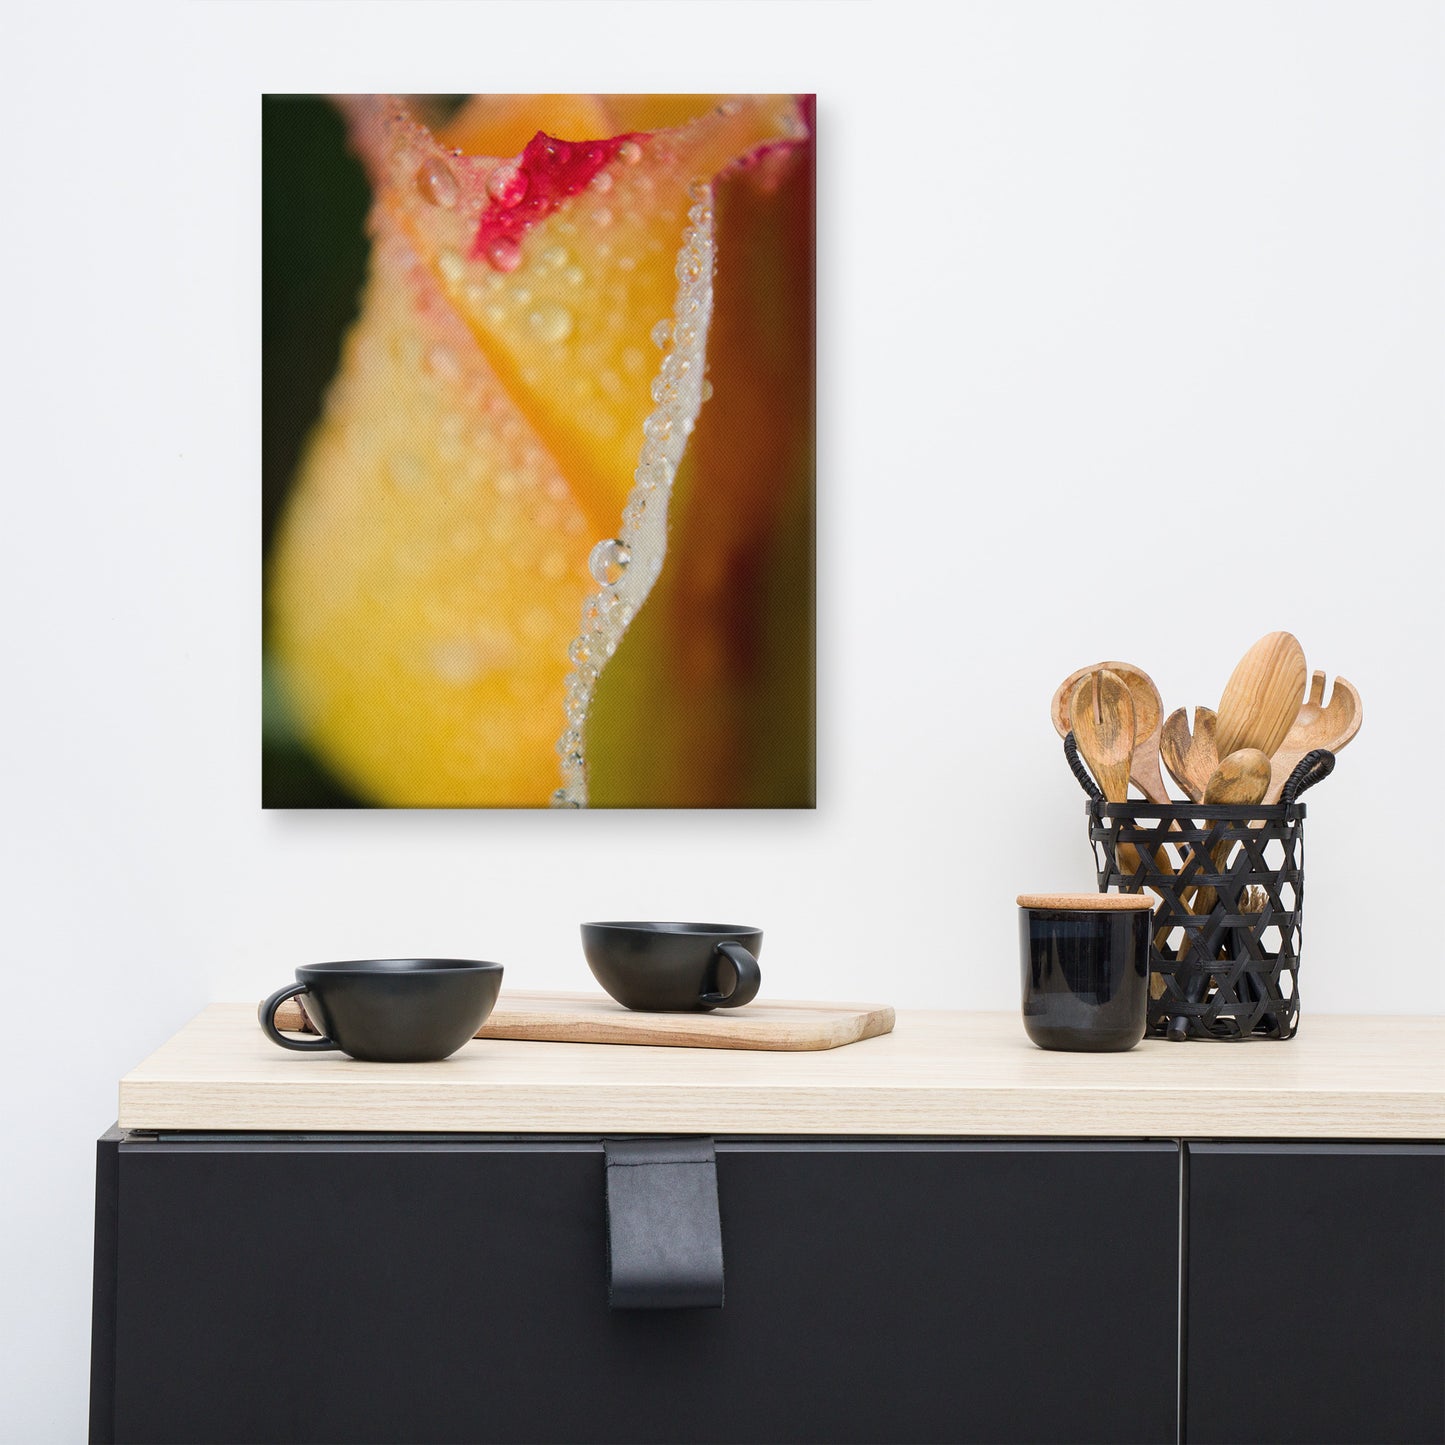 Dew on Yellow Rose Floral Nature Canvas Wall Art Prints